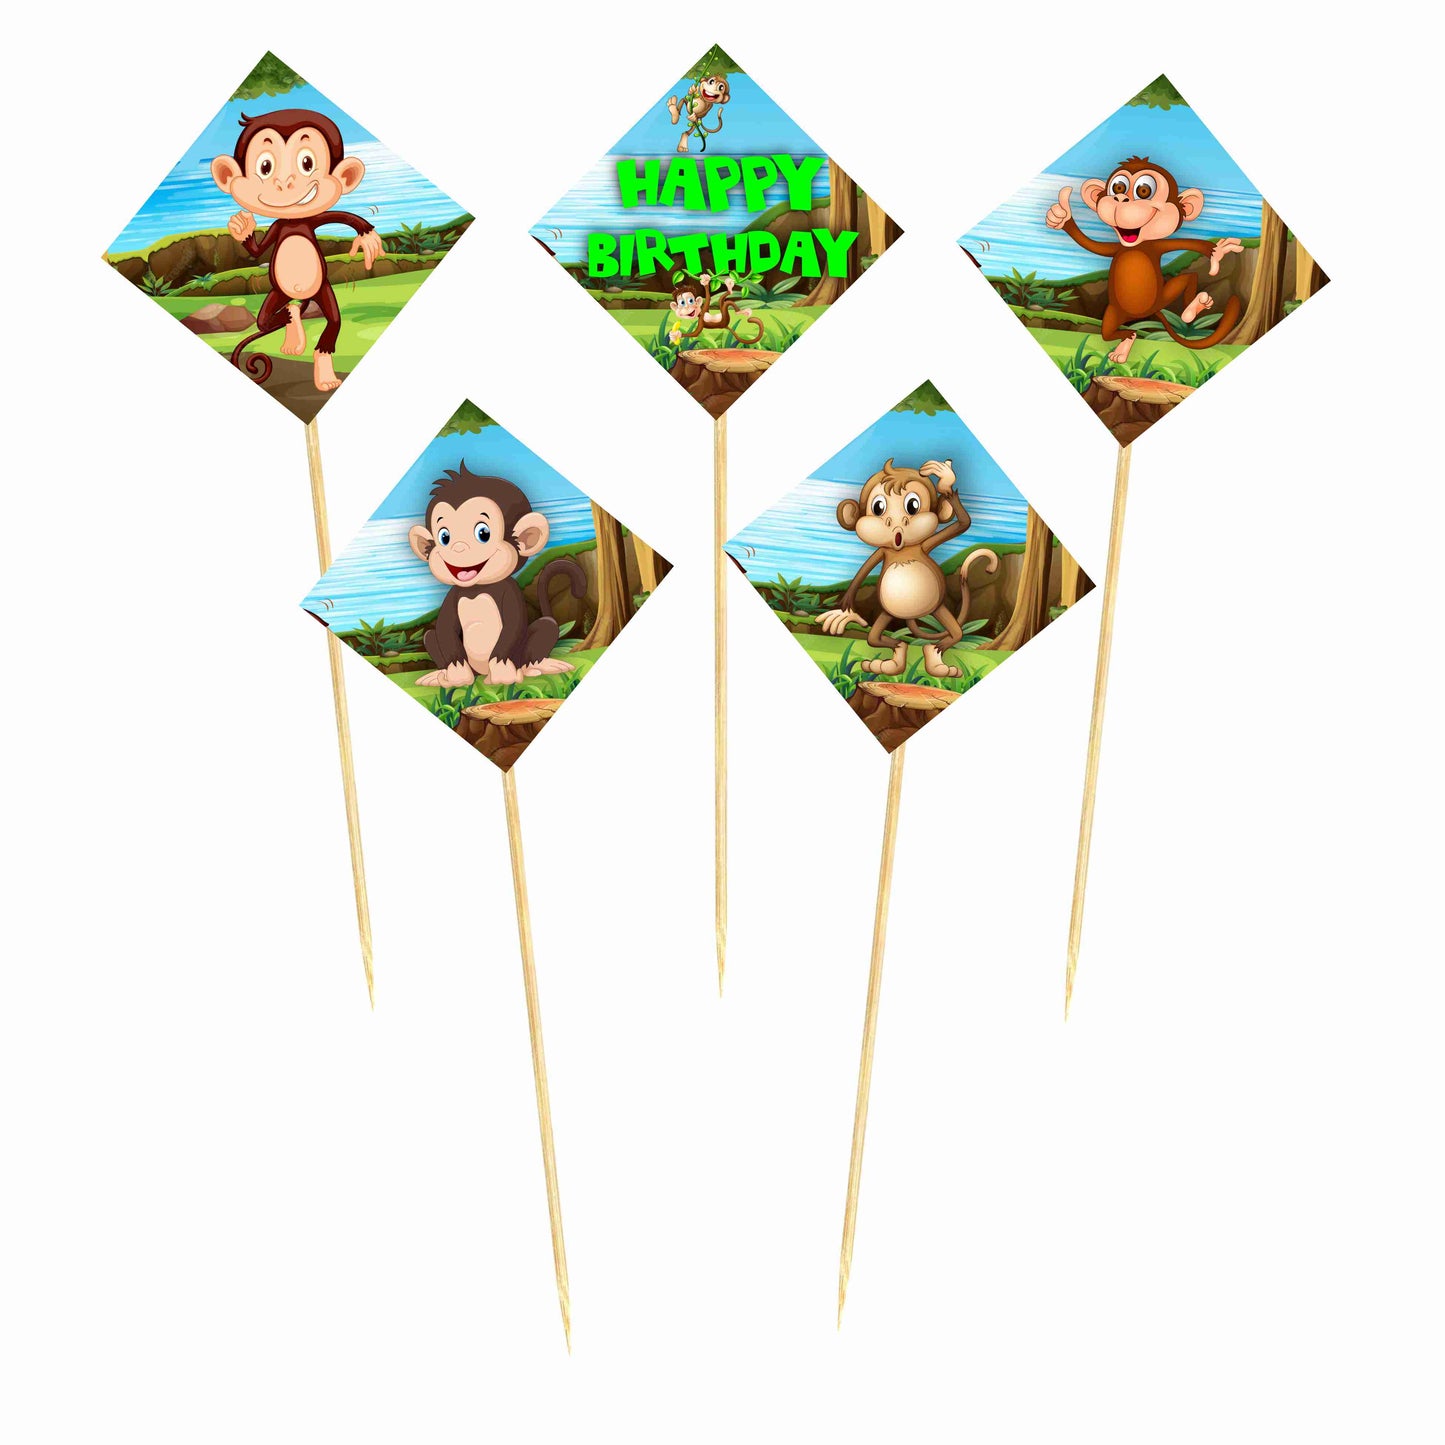 Monkey Theme Cake Topper Pack of 10 Nos for Birthday Cake Decoration Theme Party Item For Boys Girls Adults Birthday Theme Decor